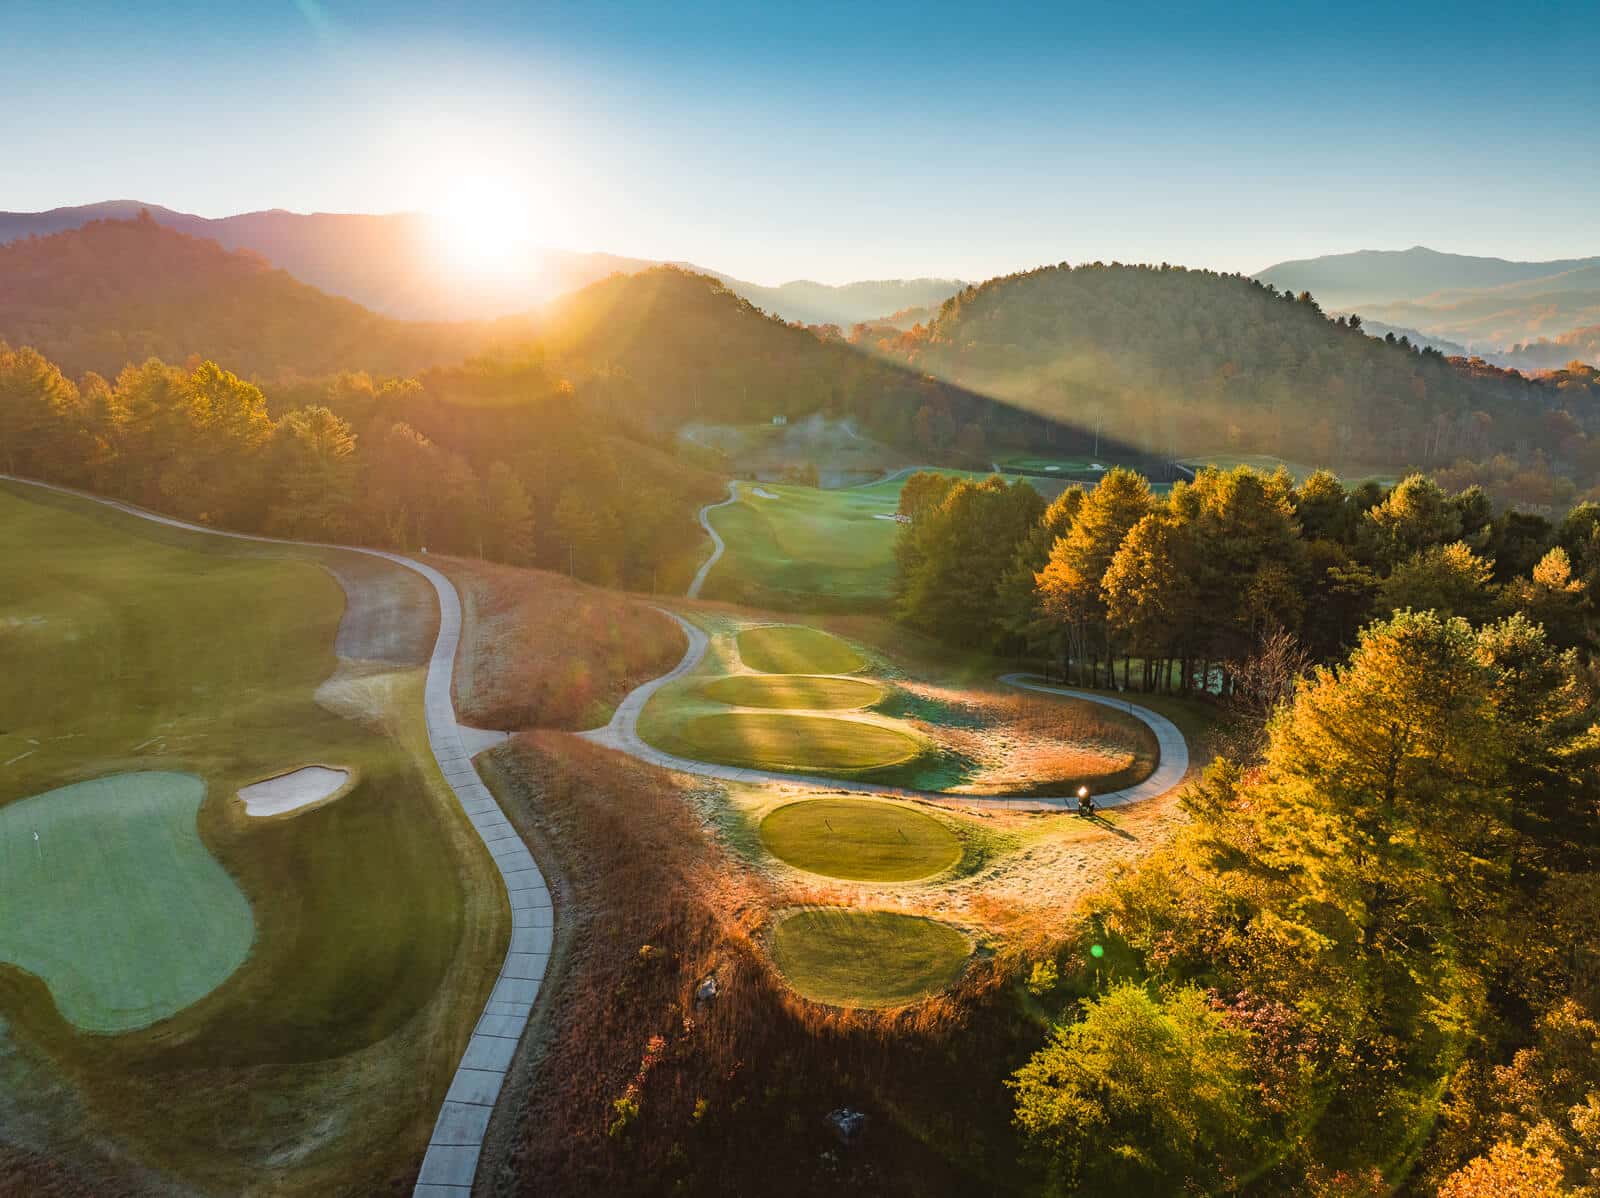 Aerial view of Sequoyah National Golf Course at sunrise, showcasing vibrant autumn trees, undulating greens, and a winding cart path amidst a hilly landscape.